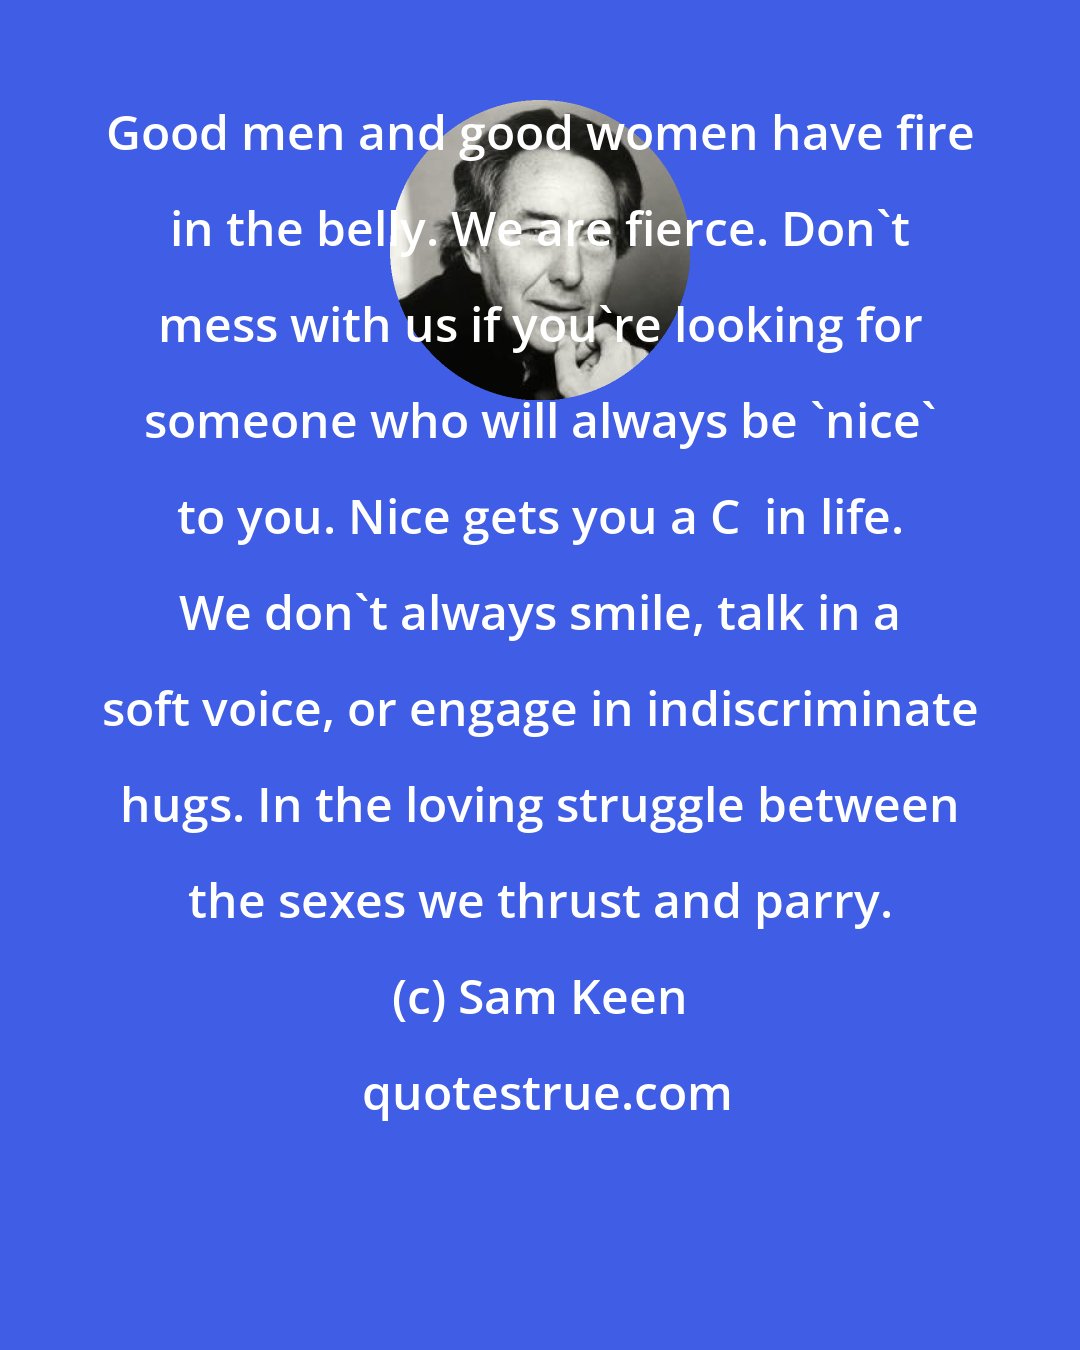 Sam Keen: Good men and good women have fire in the belly. We are fierce. Don't mess with us if you're looking for someone who will always be 'nice' to you. Nice gets you a C+ in life. We don't always smile, talk in a soft voice, or engage in indiscriminate hugs. In the loving struggle between the sexes we thrust and parry.